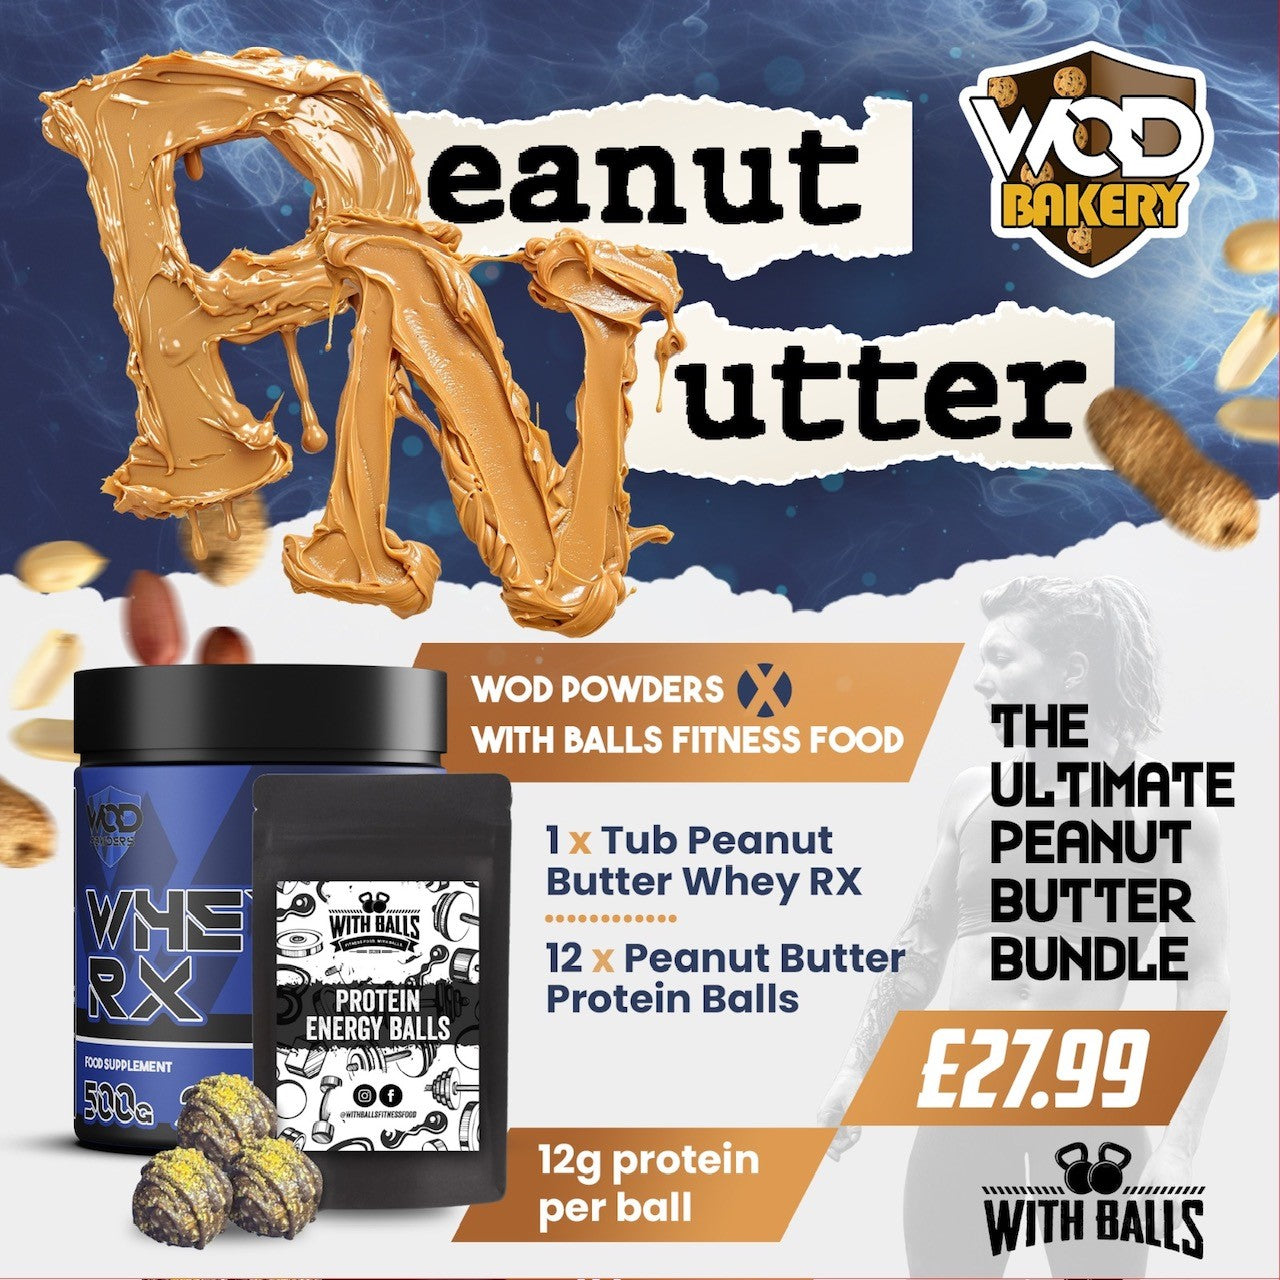 The Peanut Butter Protein Bundle